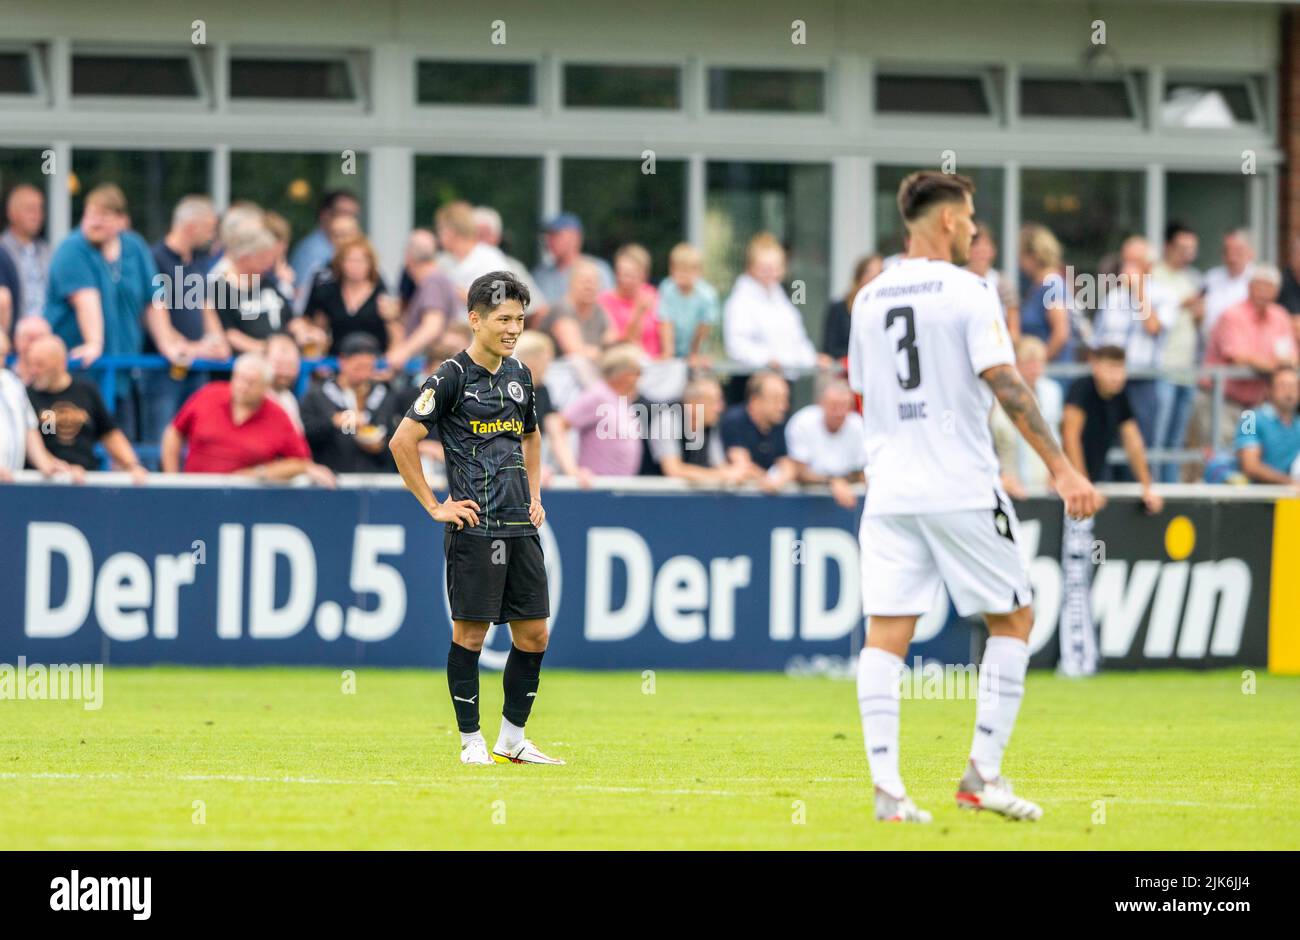 Rehden, Germany. 31st July, 2022. Soccer: DFB-Pokal, BSV Rehden - SV Sandhausen, 1st round, Waldsportstätten sports field: Rehden's Ka-ram Han is disappointed after the final whistle. Credit: David Inderlied/dpa - IMPORTANT NOTE: In accordance with the requirements of the DFL Deutsche Fußball Liga and the DFB Deutscher Fußball-Bund, it is prohibited to use or have used photographs taken in the stadium and/or of the match in the form of sequence pictures and/or video-like photo series./dpa/Alamy Live News Stock Photo